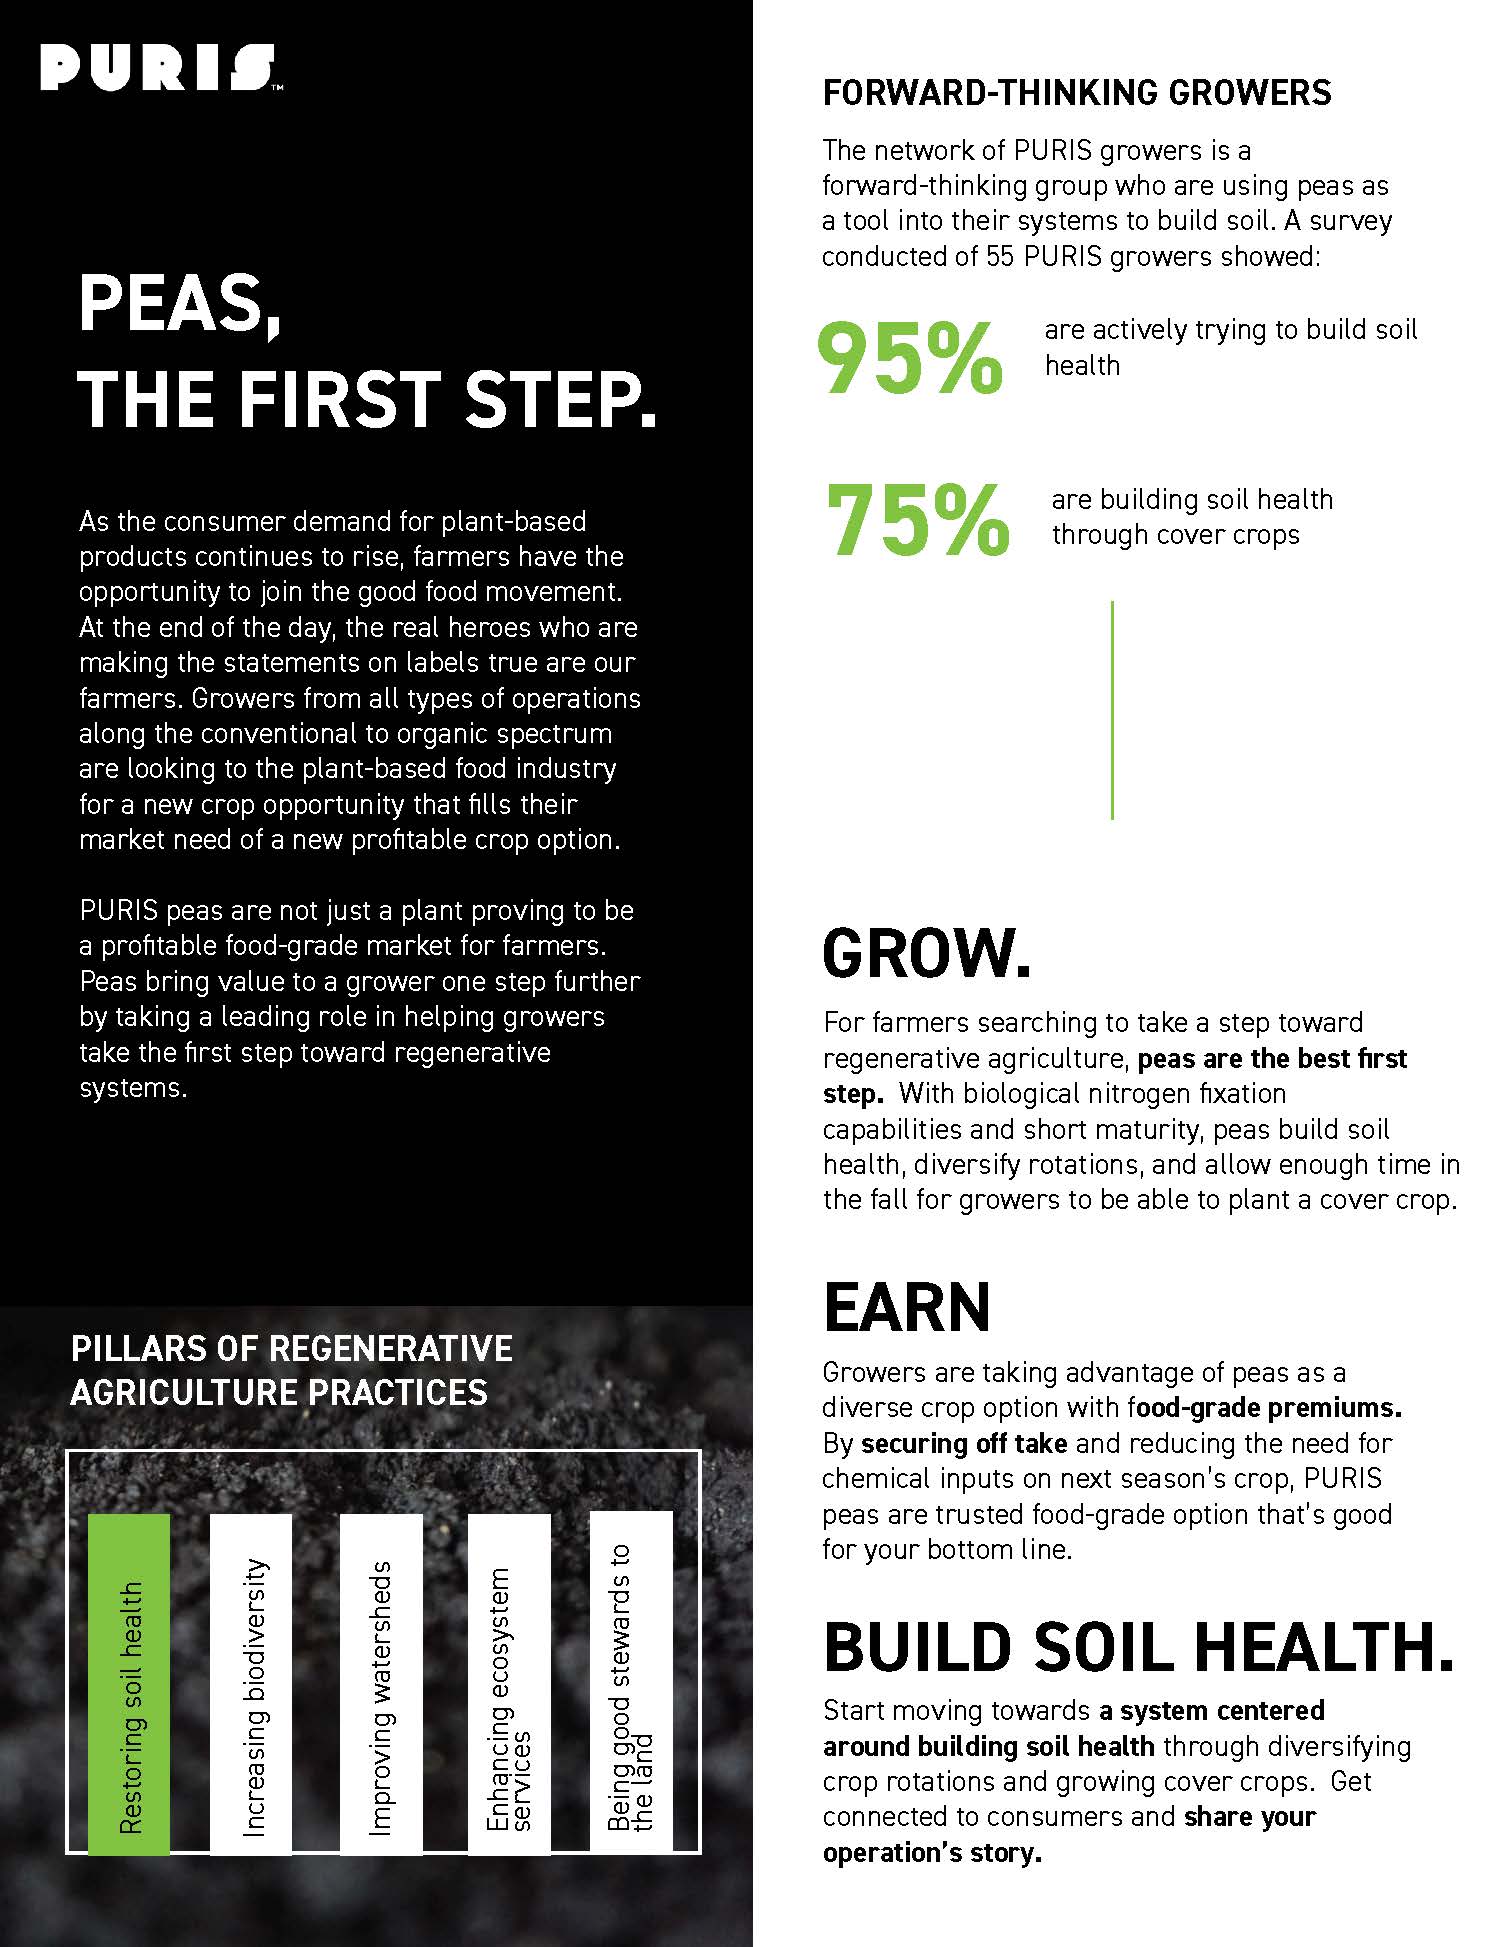 Peas, the First Step